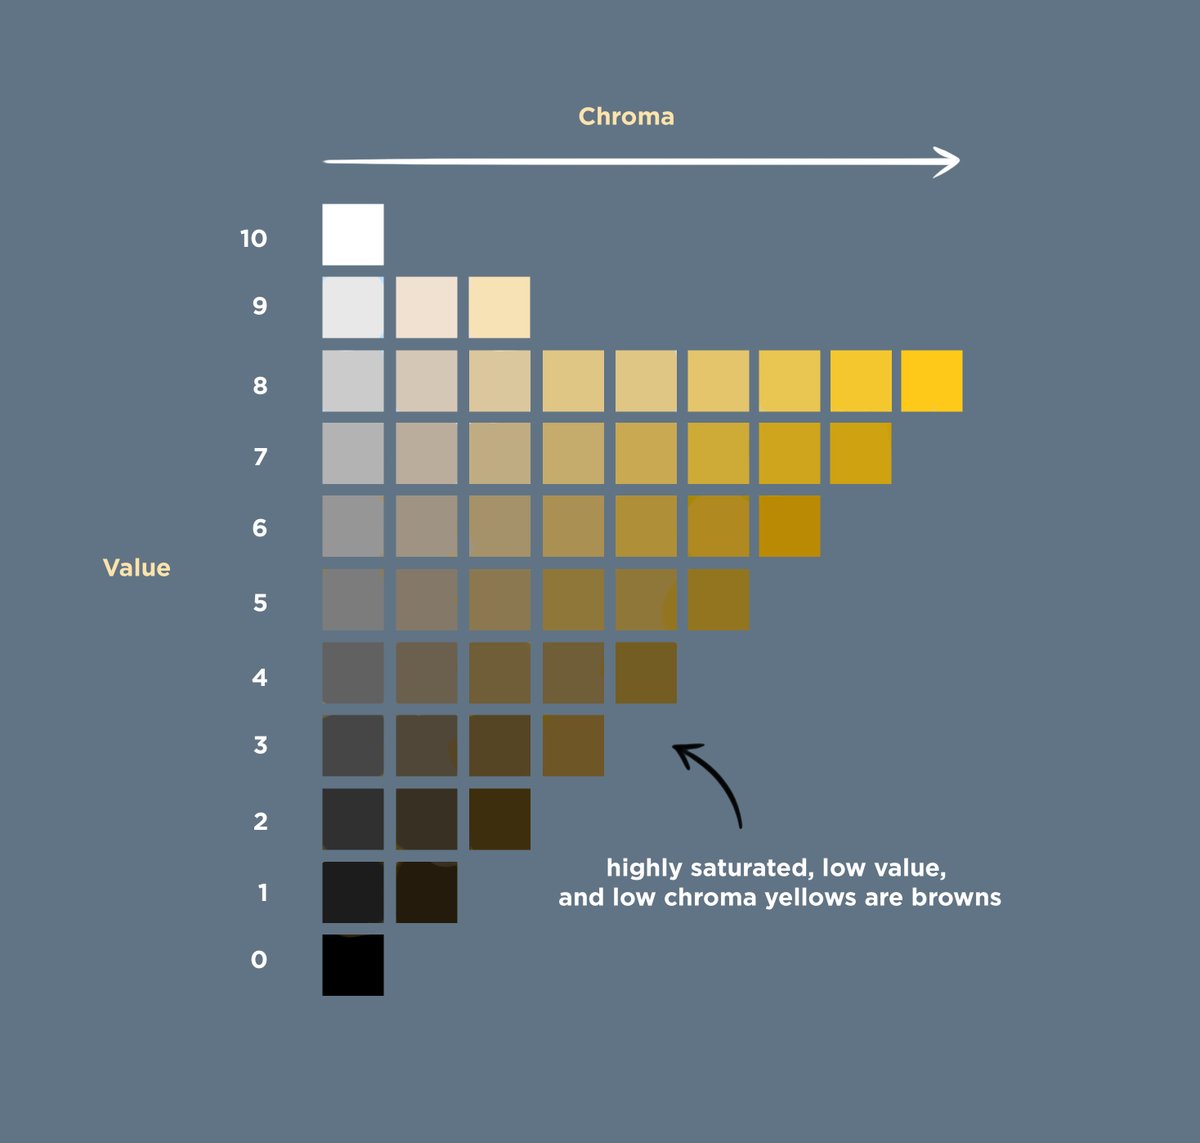 Chroma is distinct from, but related to, saturation. You can have a highly saturated yellow hue at a dark value. This would mean that it is a pure color, but at a low intensity. That color is not high chroma, because it appears brown and not what we would describe as yellow.